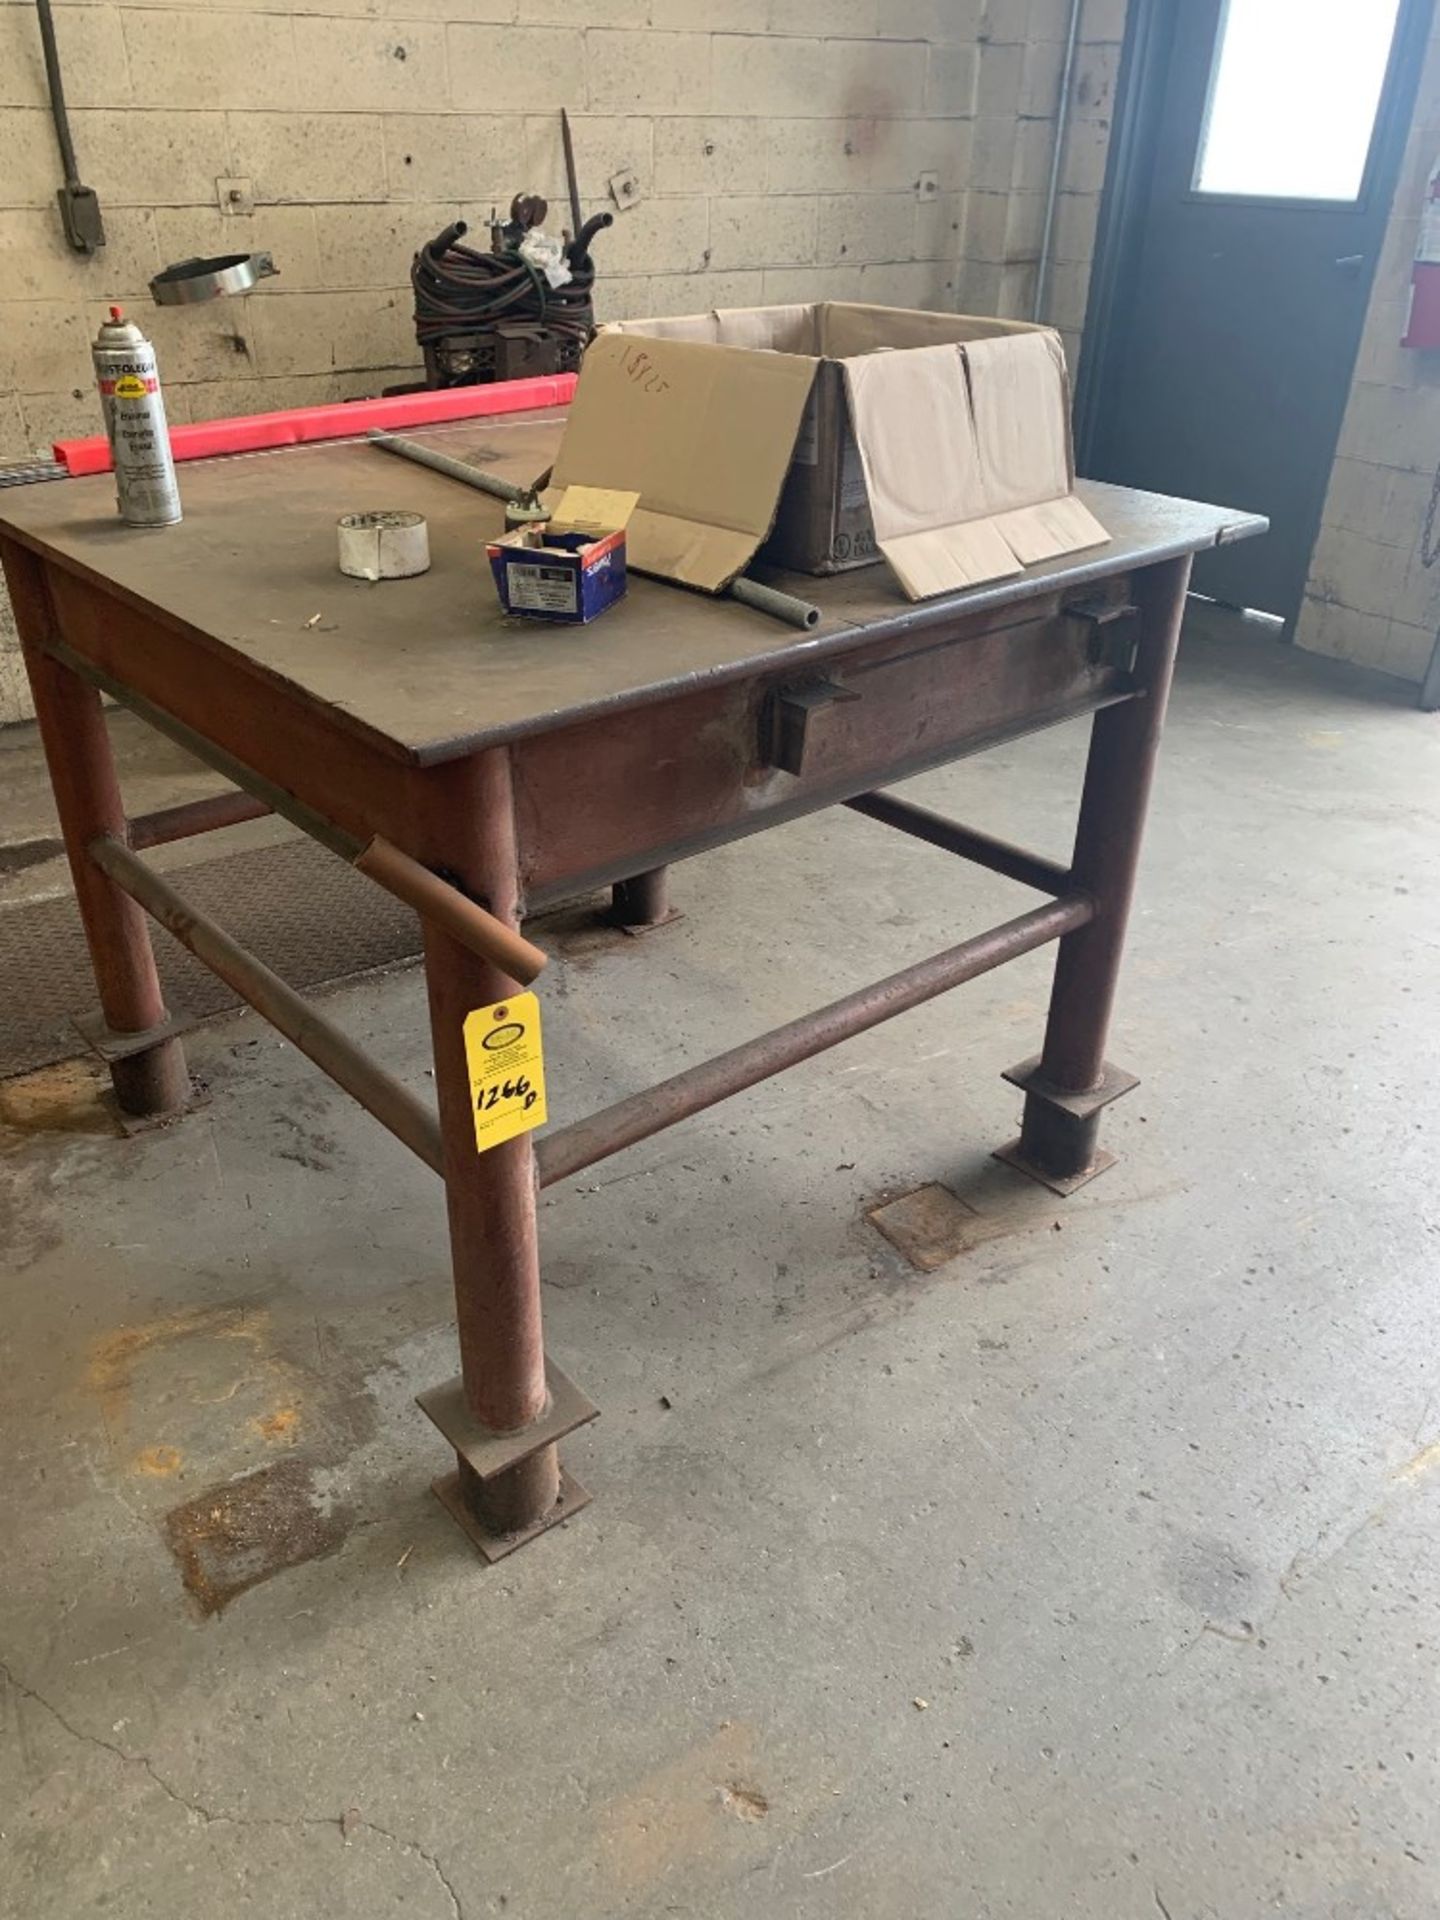 Welding Table, 3/4" steel top, 4' W X 8' L, portable on wheels: Required Loading Fee $150.00, - Image 2 of 3